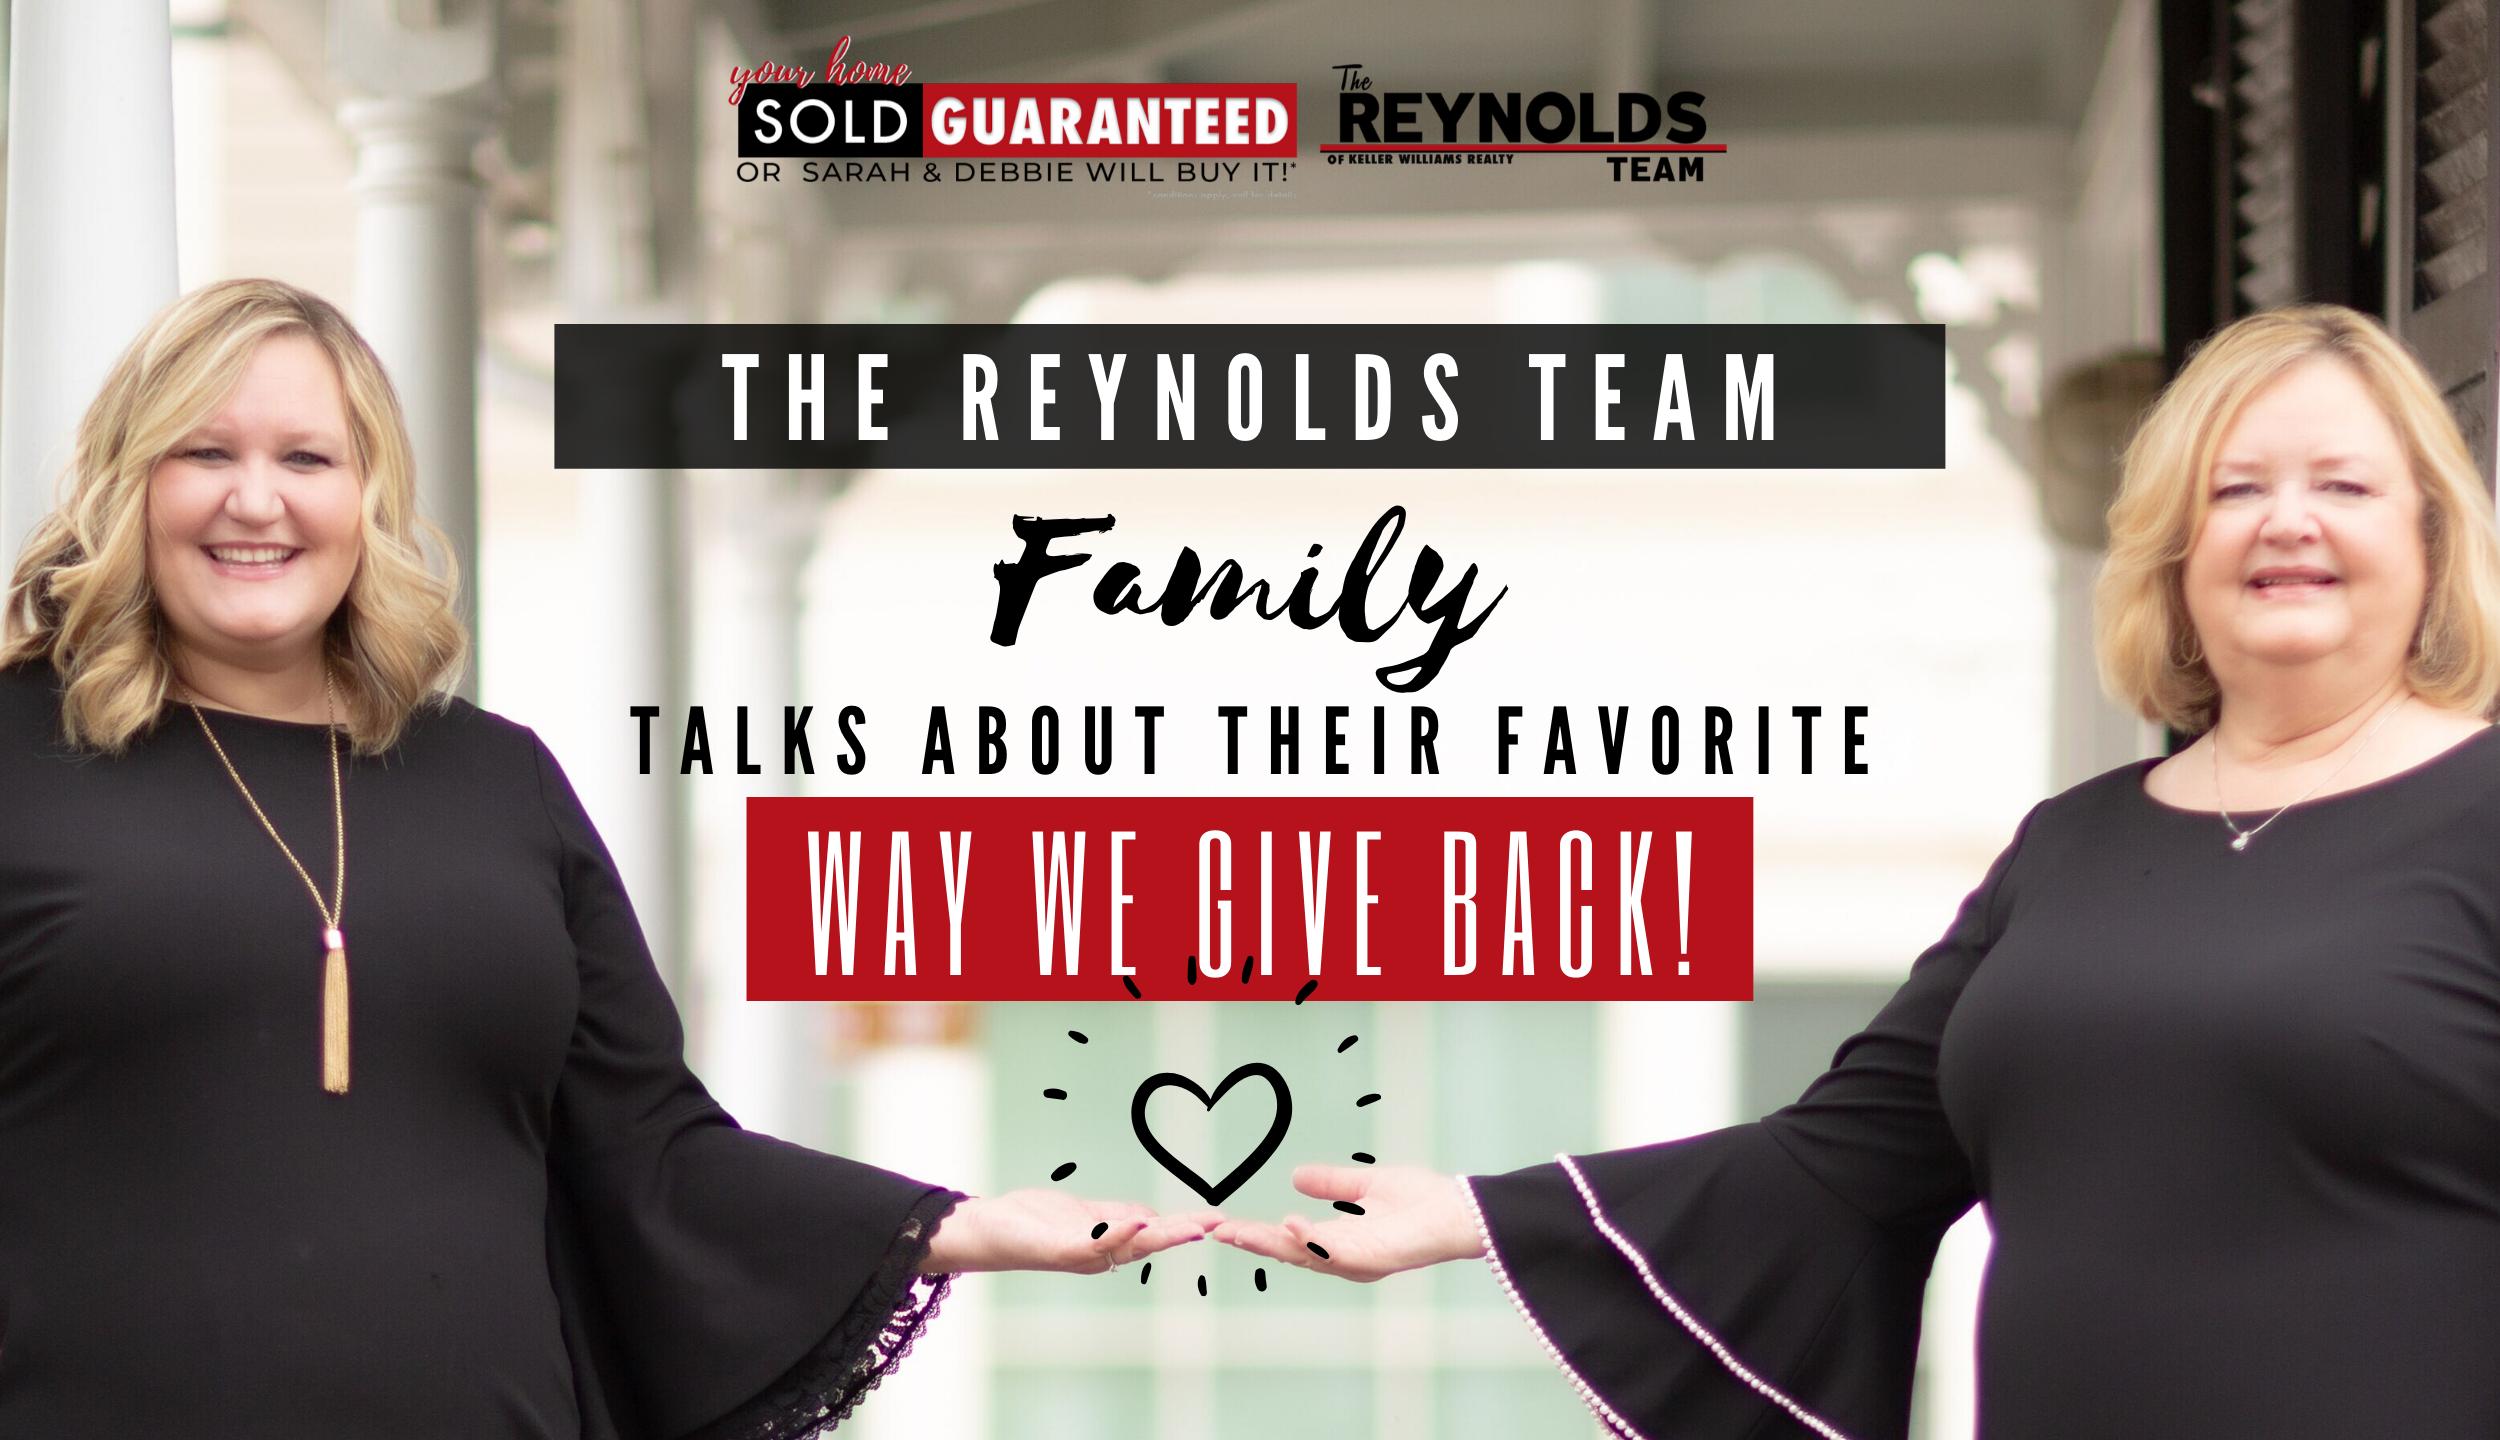 The Reynolds Team Family Talks About Their Favorite Way We Give Back!